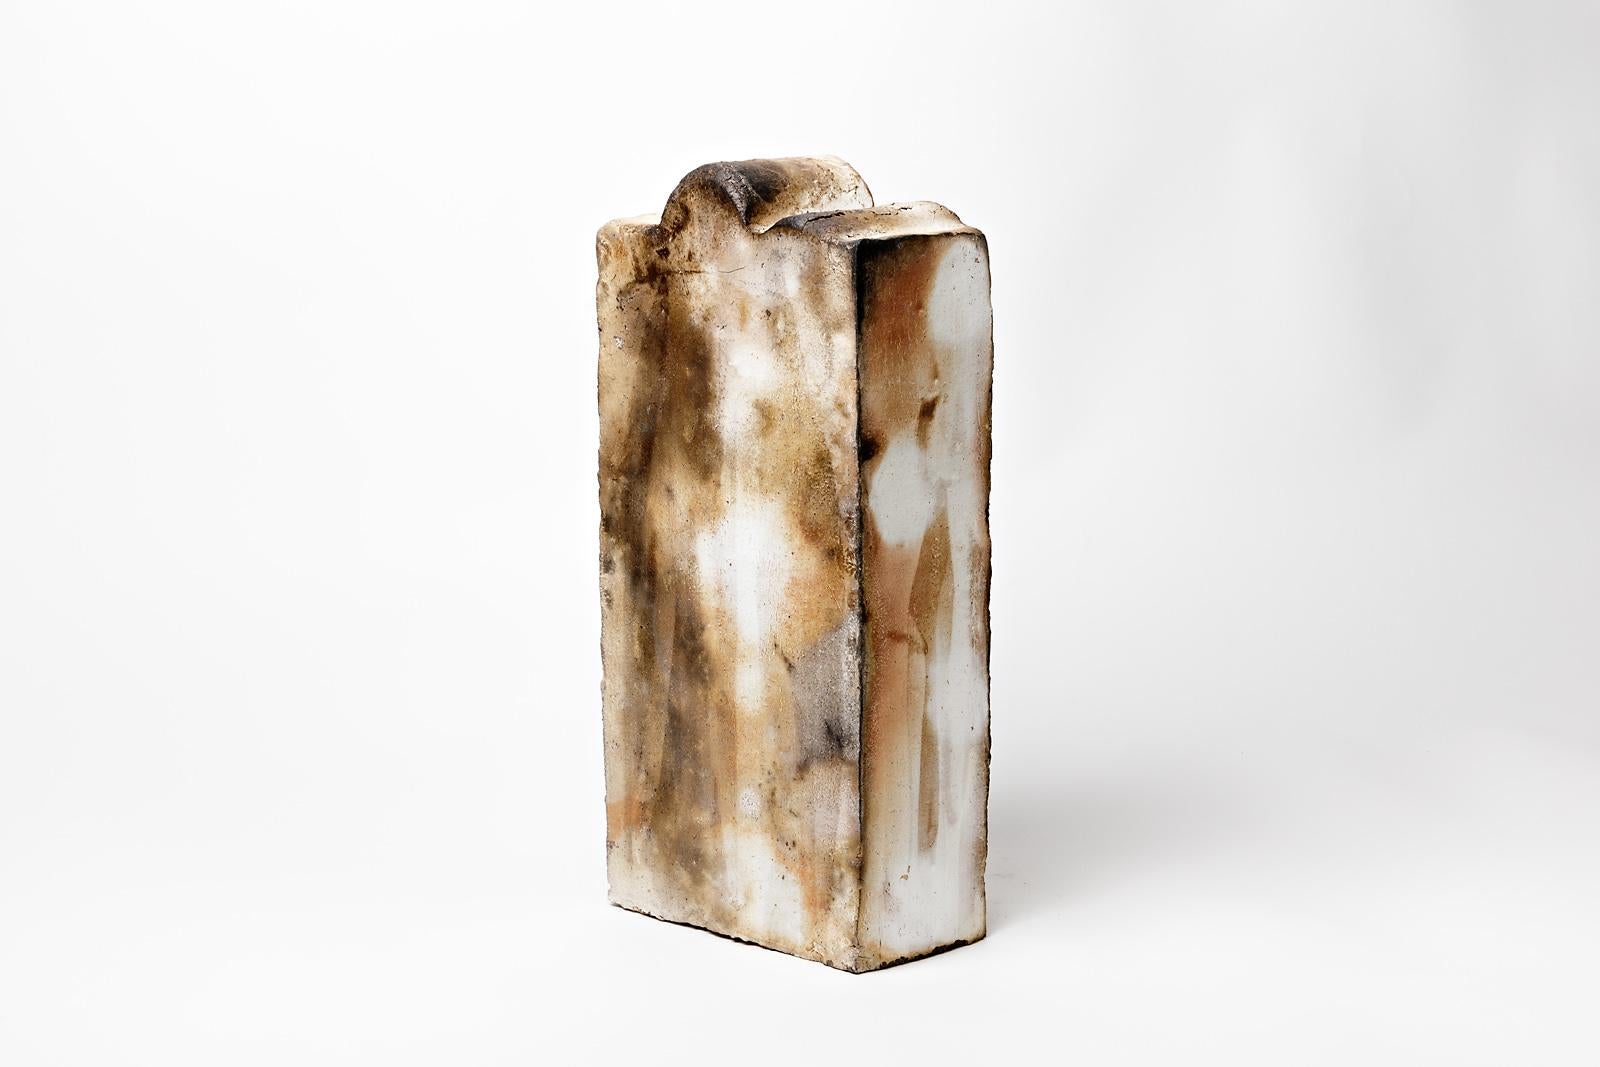 By Regnier, in La Borne

Abstract stoneware ceramic sculpture realised in 2018.

Architectural form with white and brown wood firing ceramic colors.

Perfect original conditions

Measures: Height 39cm, large 18cm, depth 10cm.